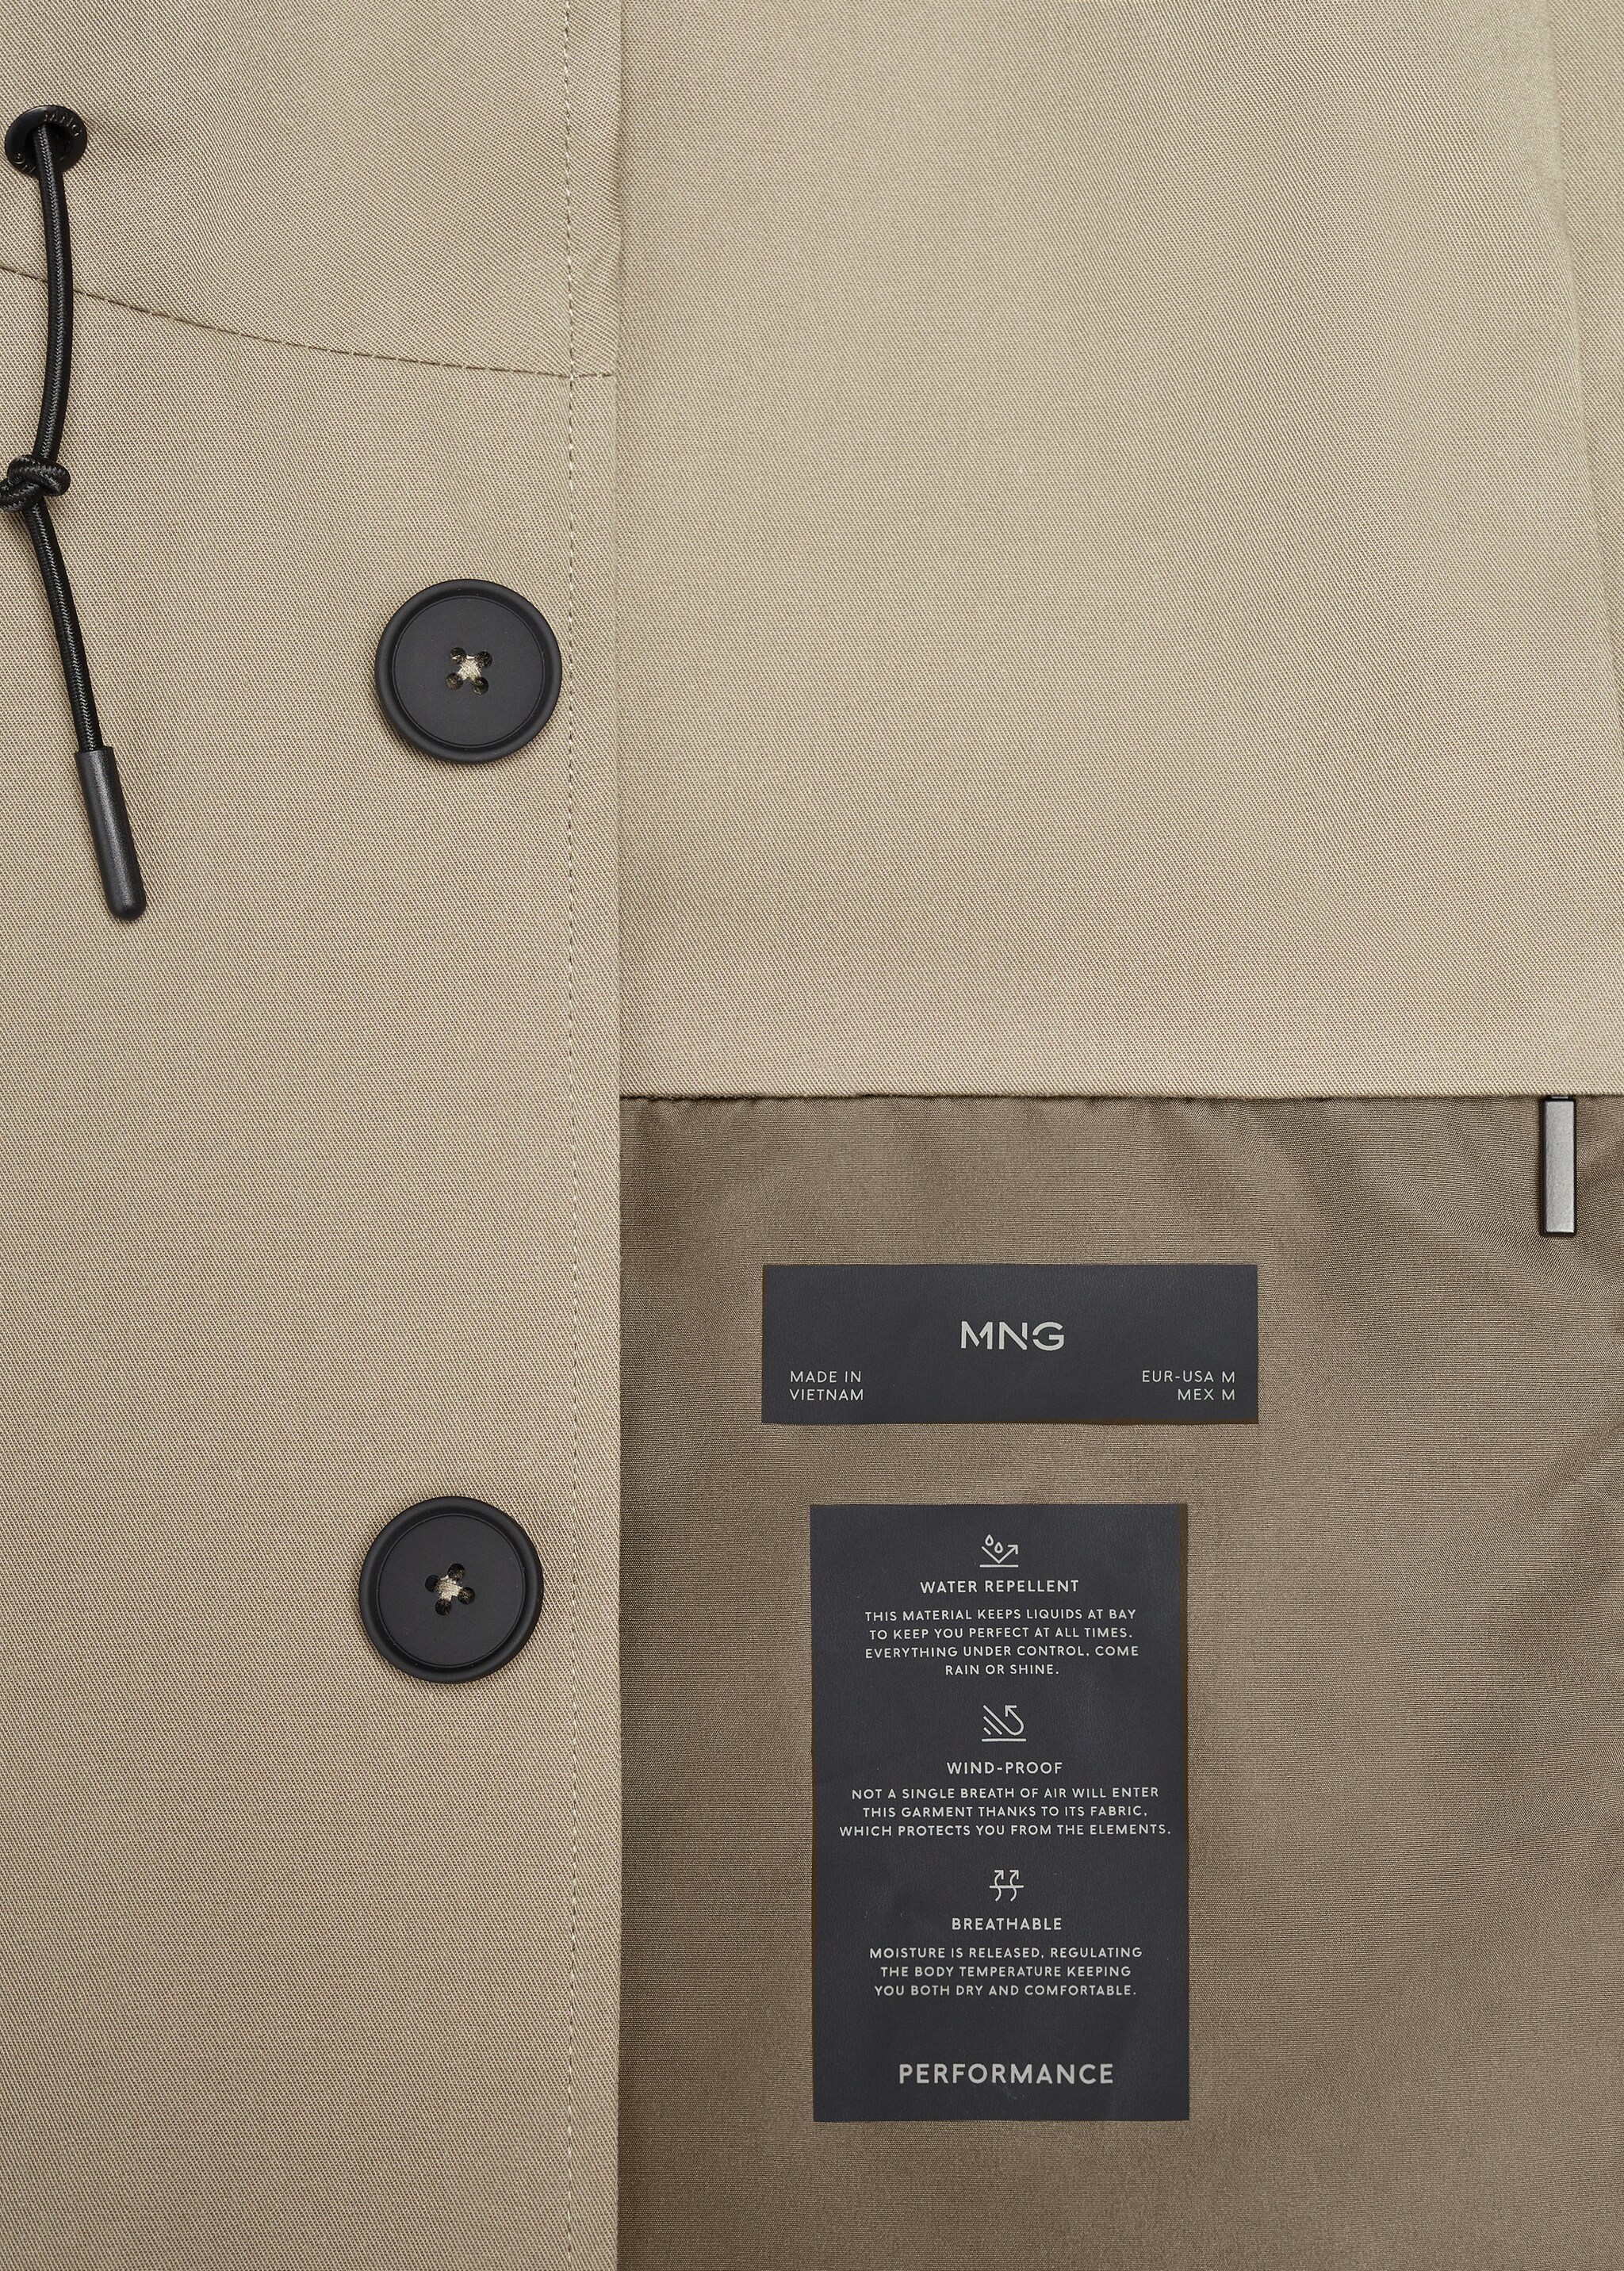 Water-repellent hooded parka - Details of the article 8